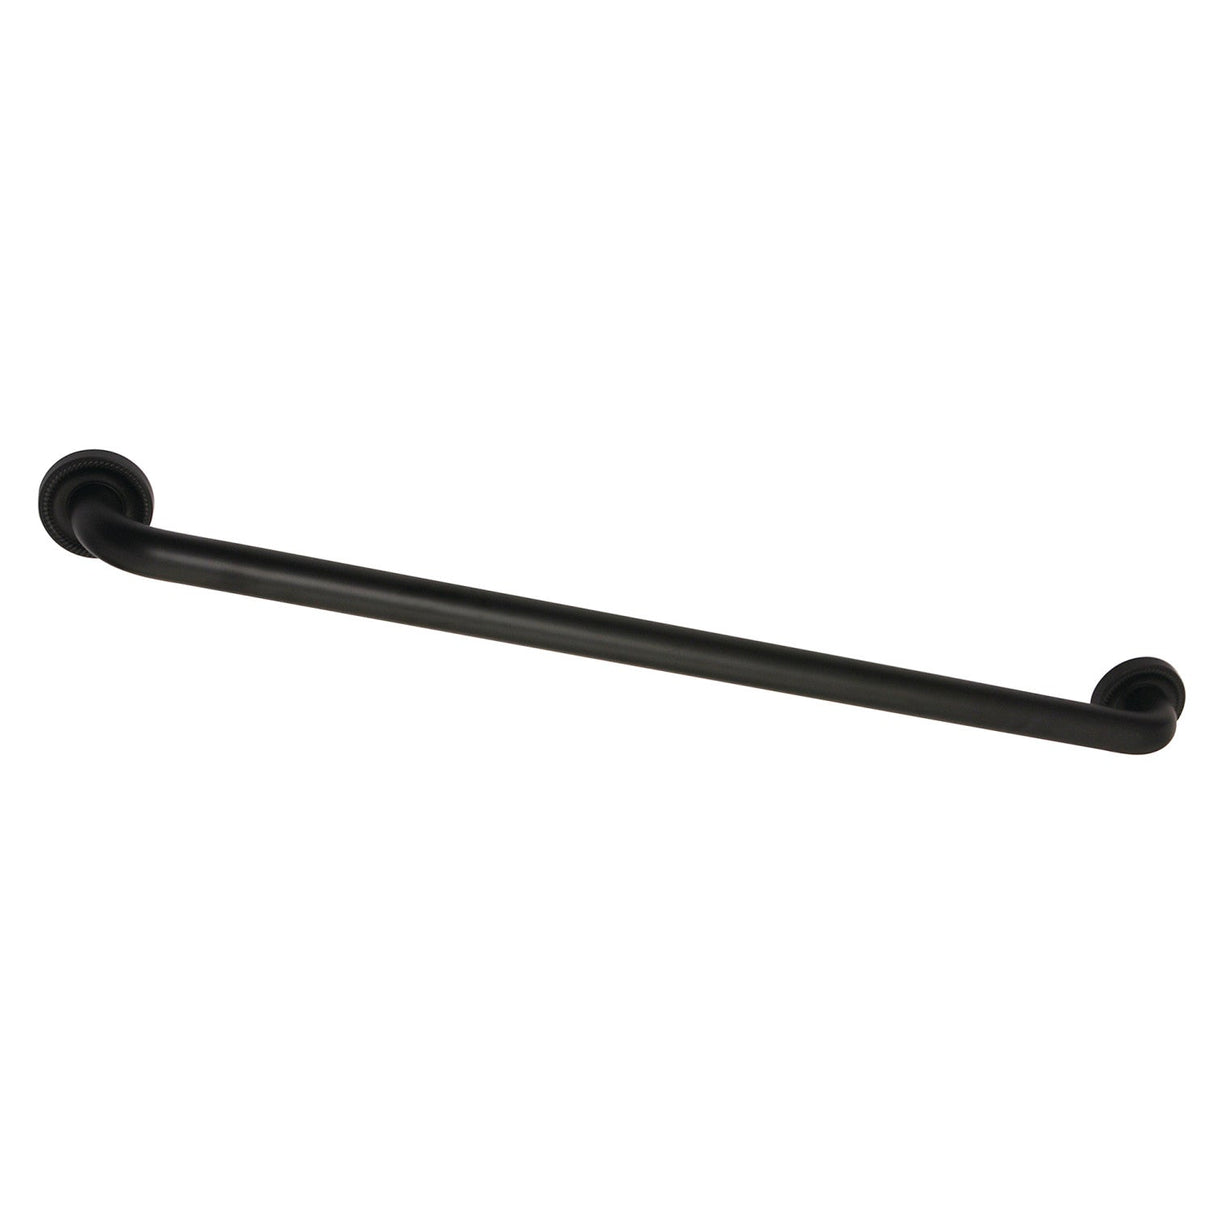 Camelon Thrive In Place DR914300 30-Inch x 1-1/4 Inch O.D Grab Bar, Matte Black